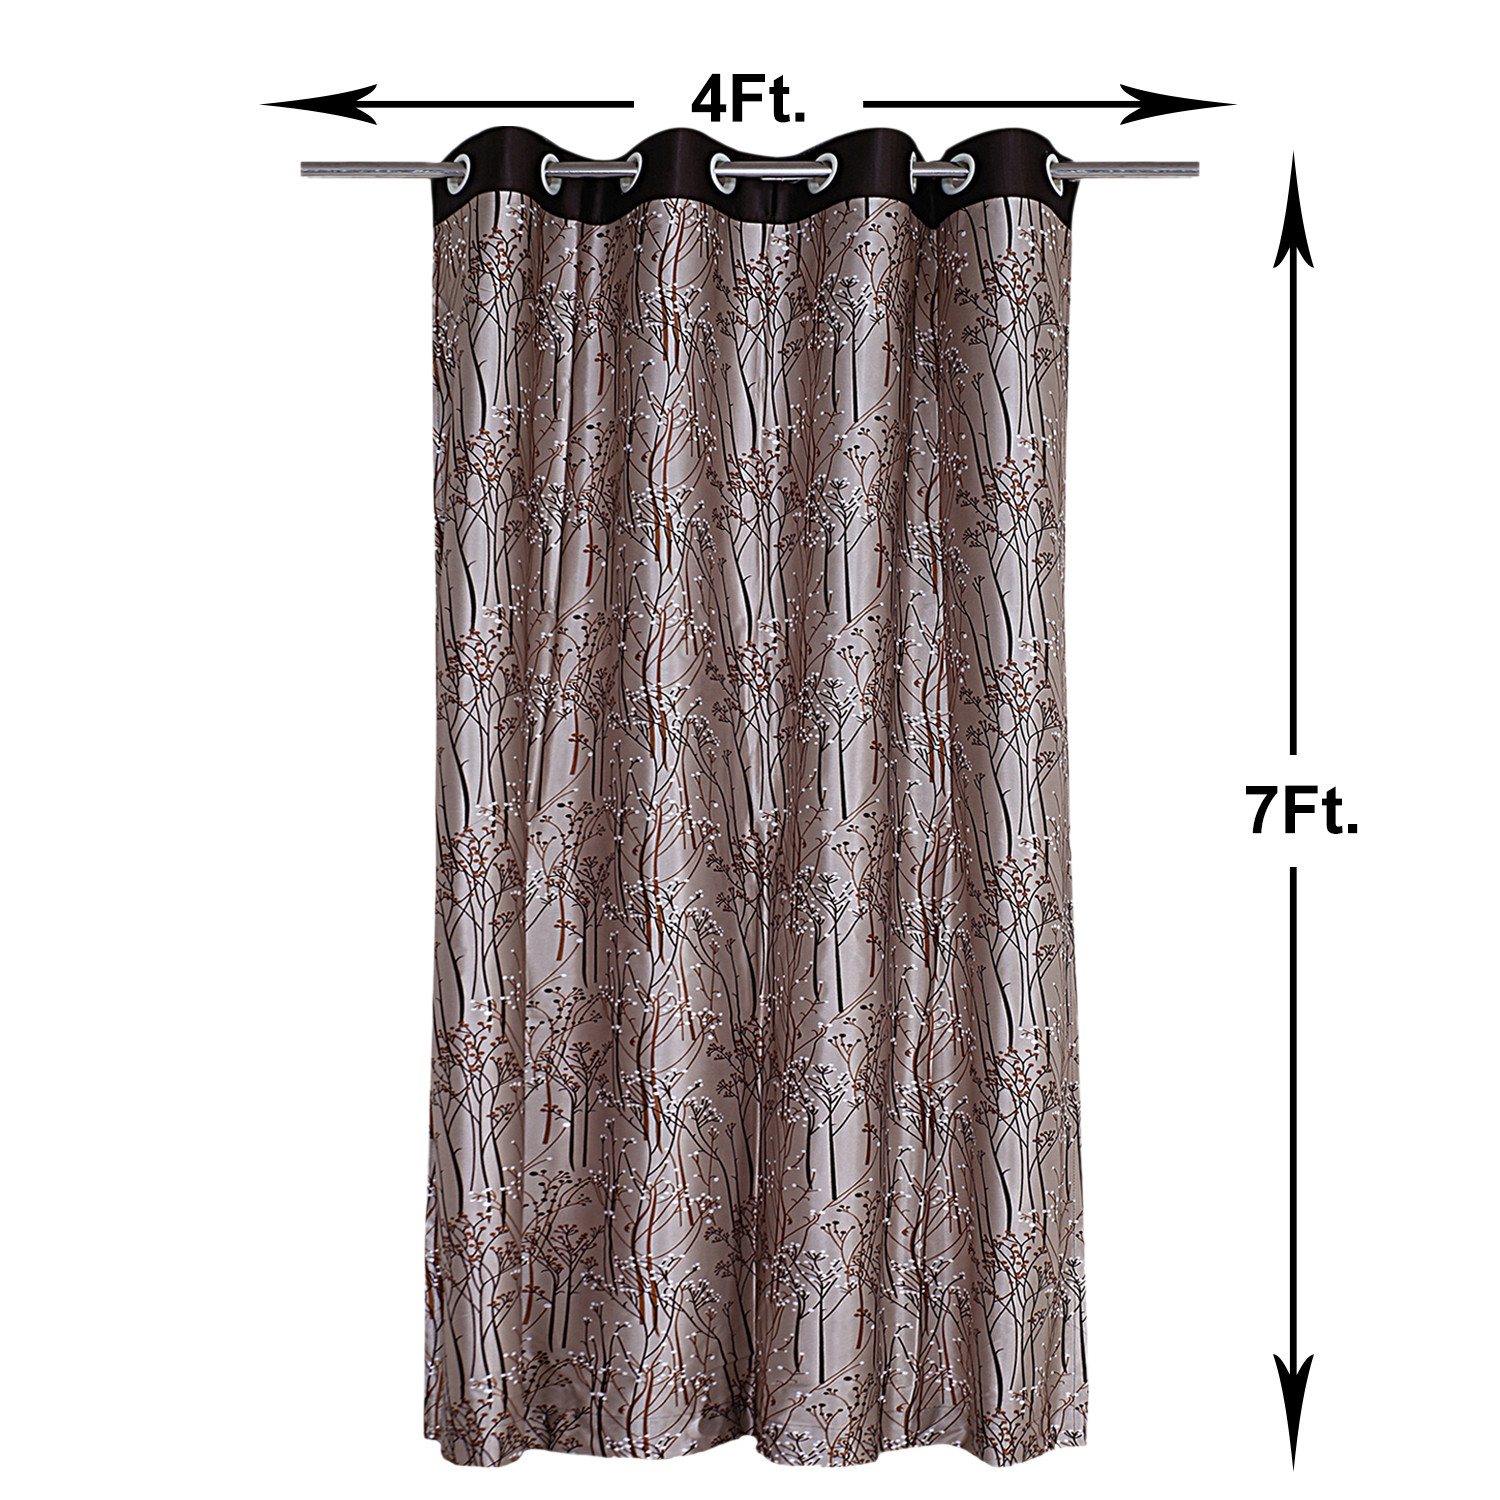 Kuber Industries Polyester Decorative 7 Feet Door Curtain|Tree Branches Print Blackout Drapes Curatin With 8 Eyelet For Home & Office (Coffee)